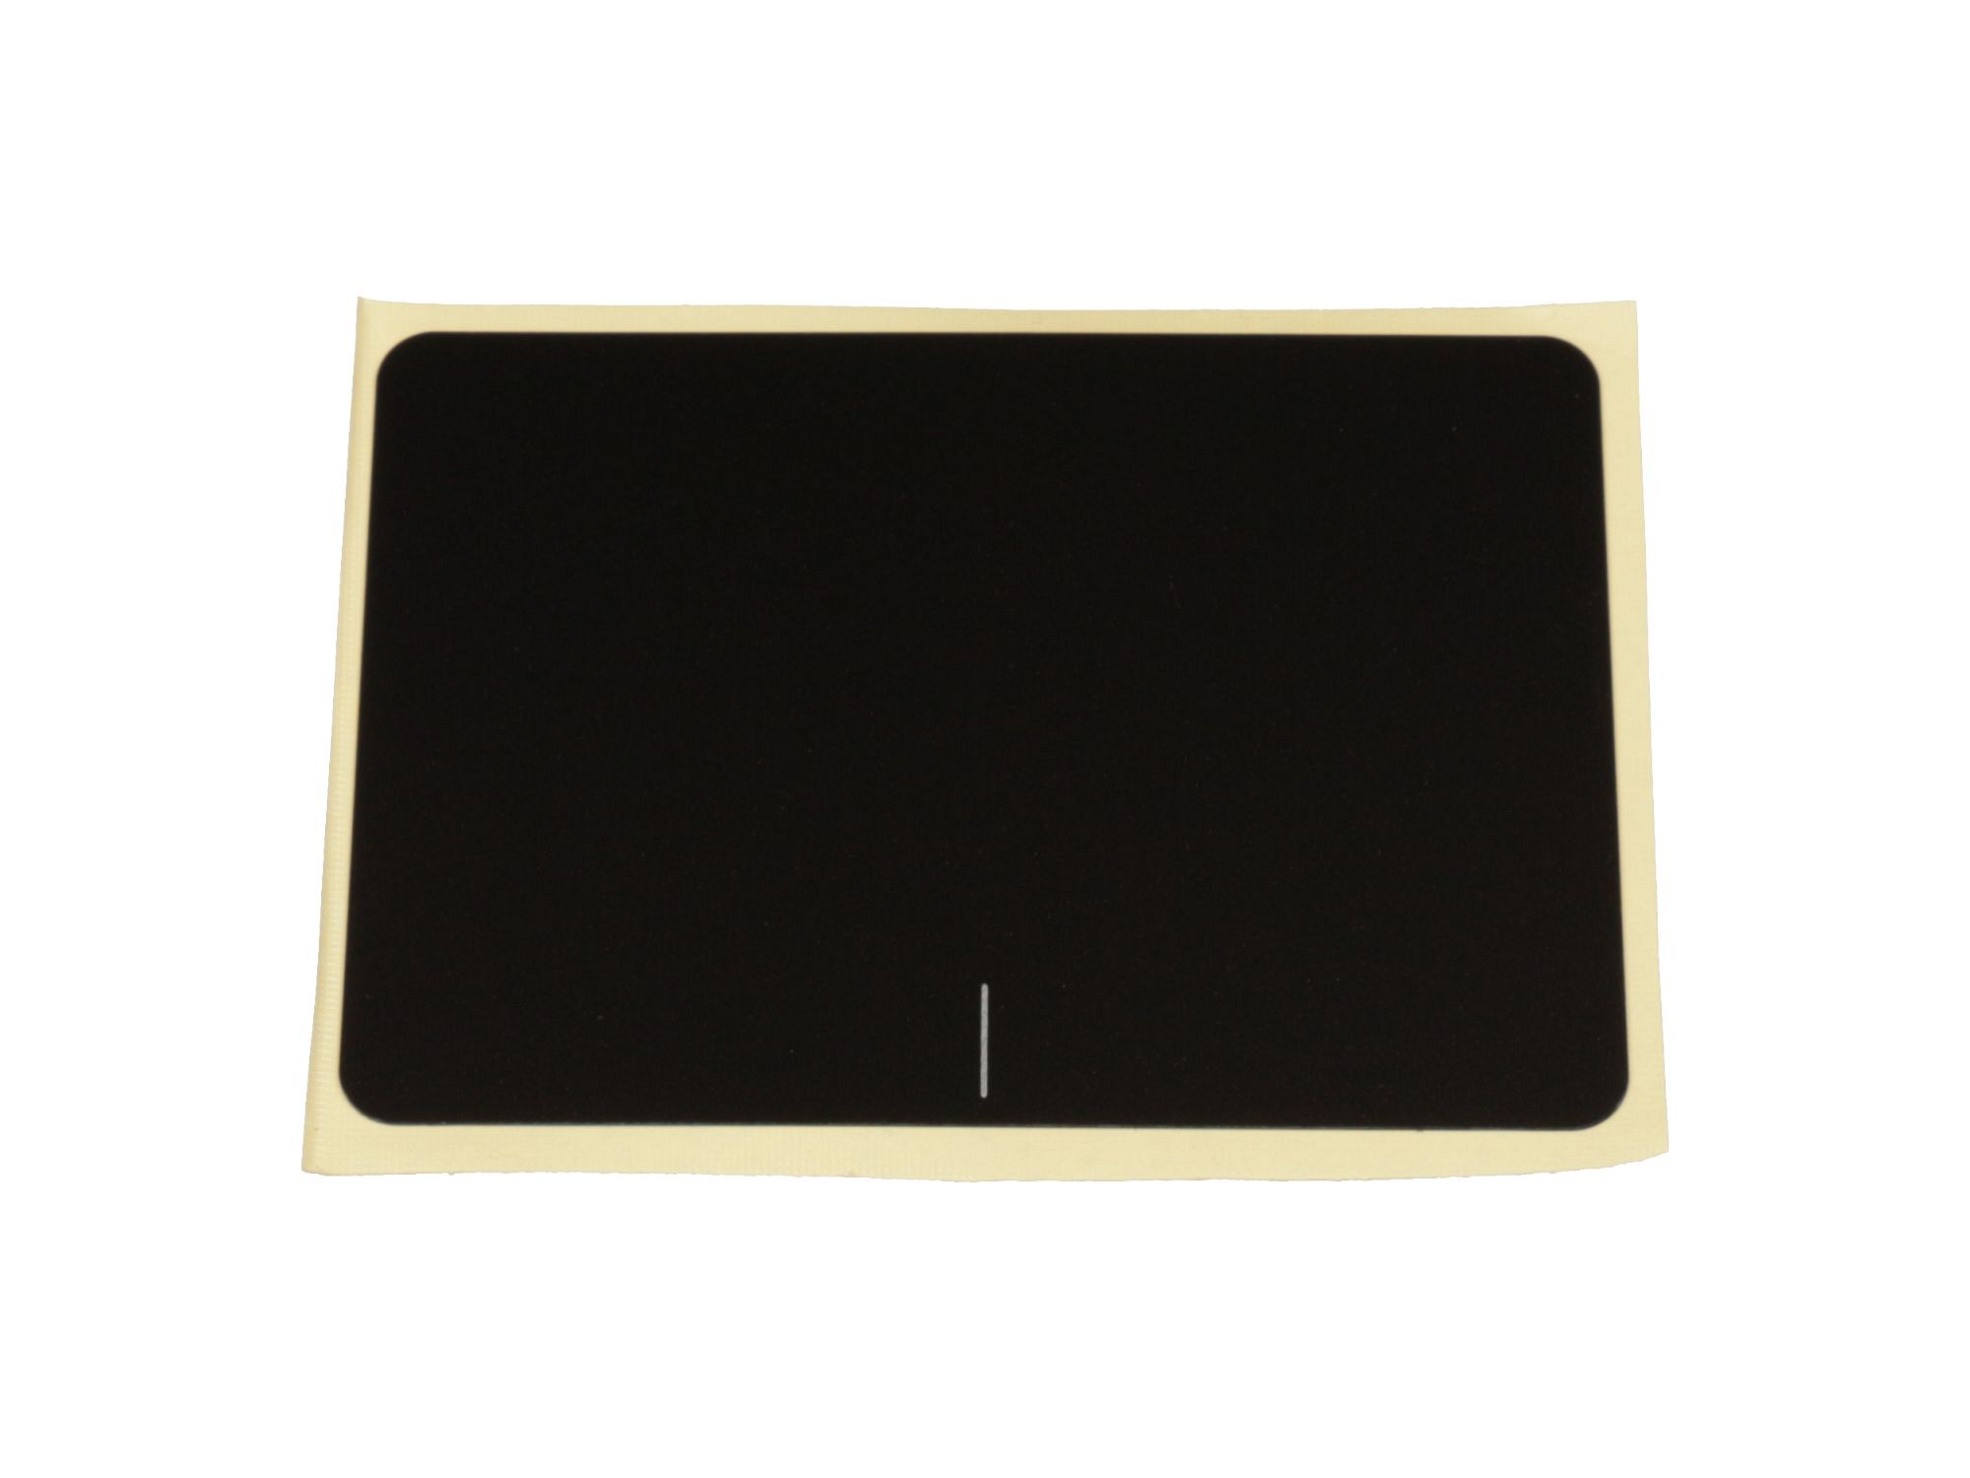 Touchpad-Cover für Asus X756UQ